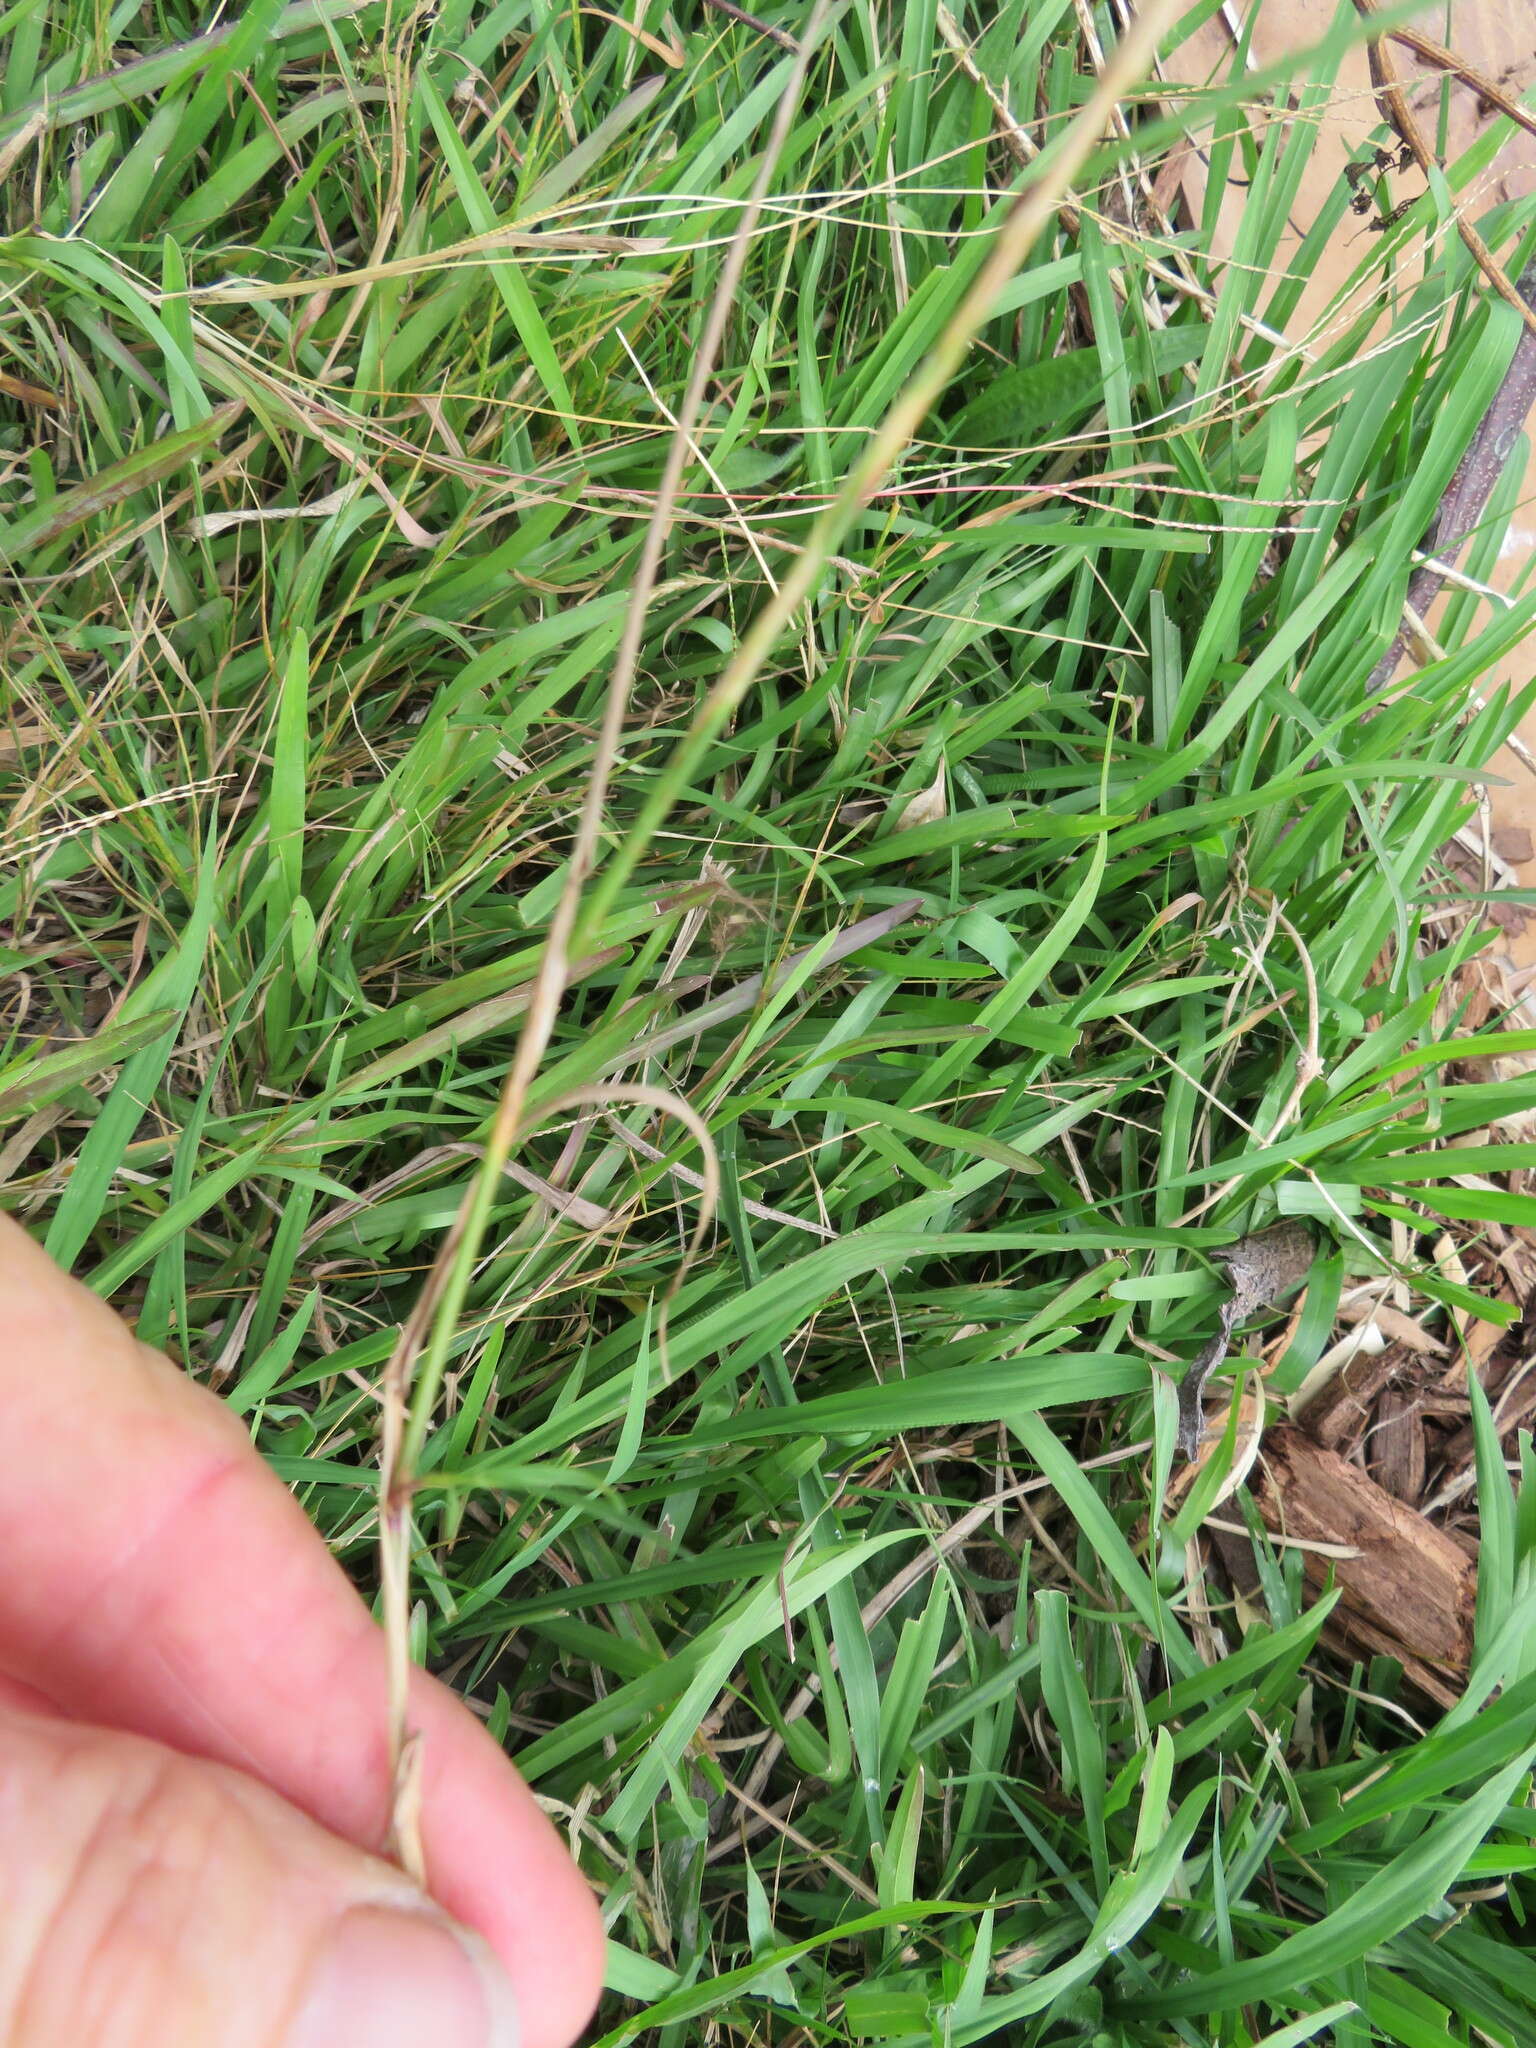 Image of Colonial bent(grass)